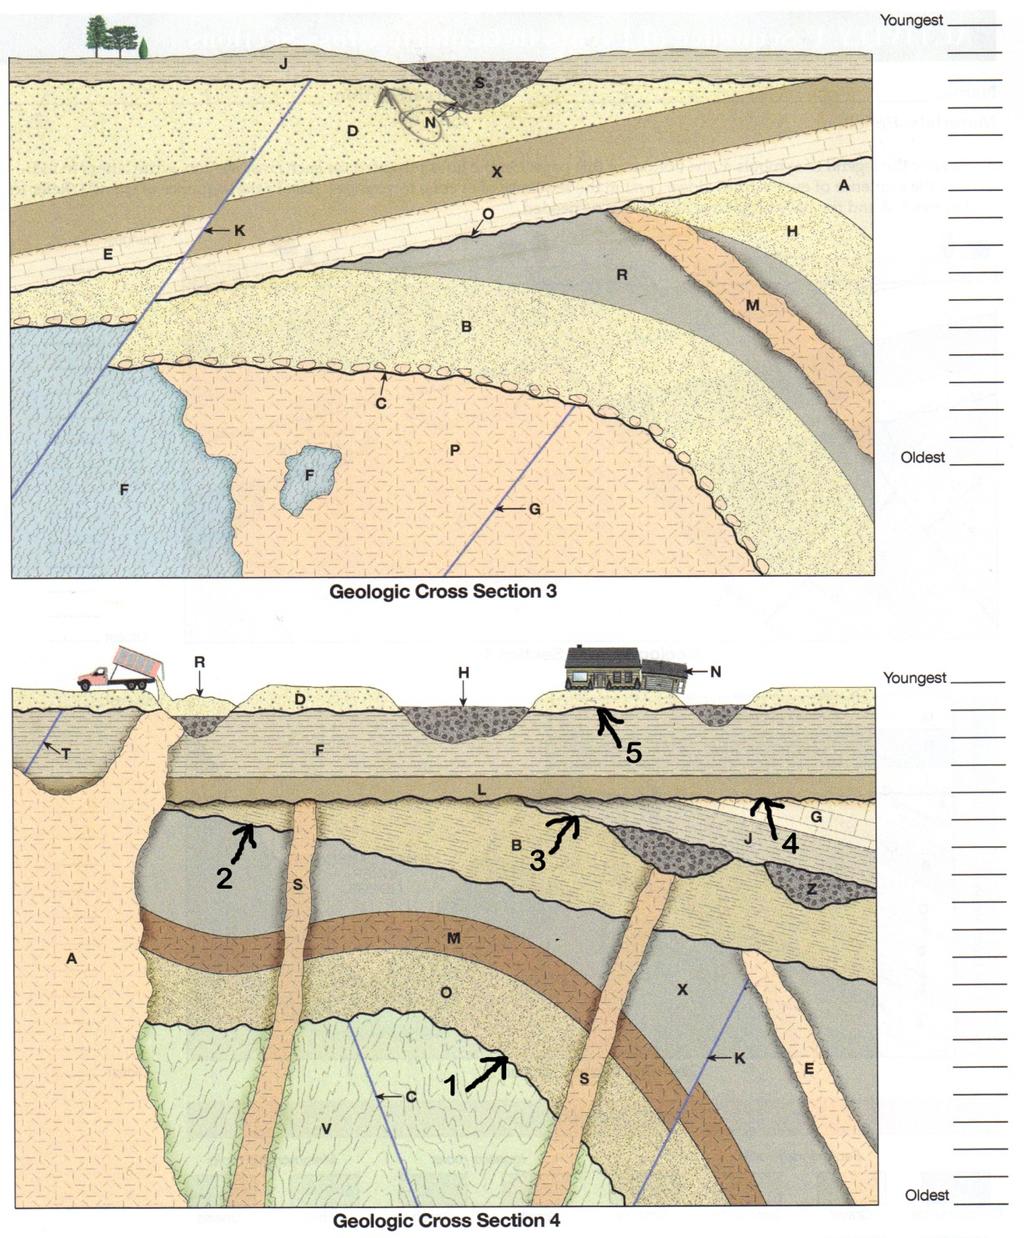 Application of Relative Dating Principles to a Geologic Cross Section Procedure: 1) Identify all labeled rock formations and structures, including intrusions, faults, and unconformities 2) Use